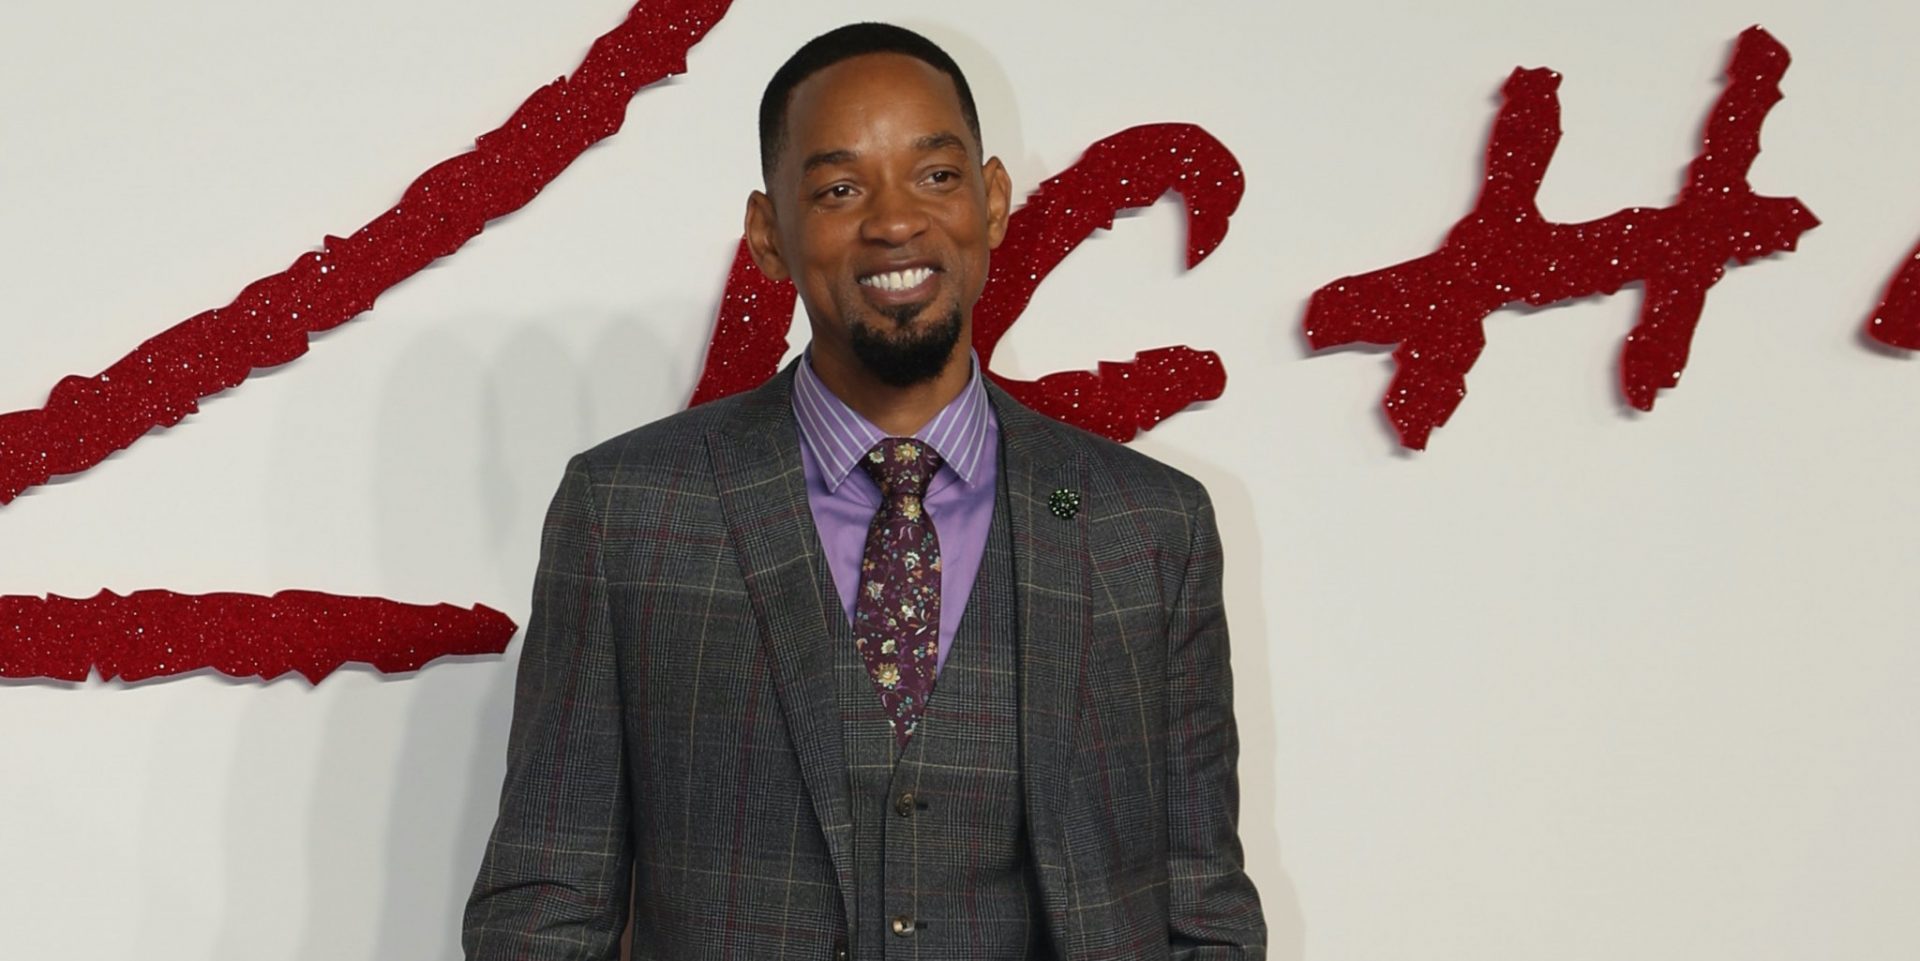 Celebrities react to Will Smith smacking Chris Rock at the Oscars